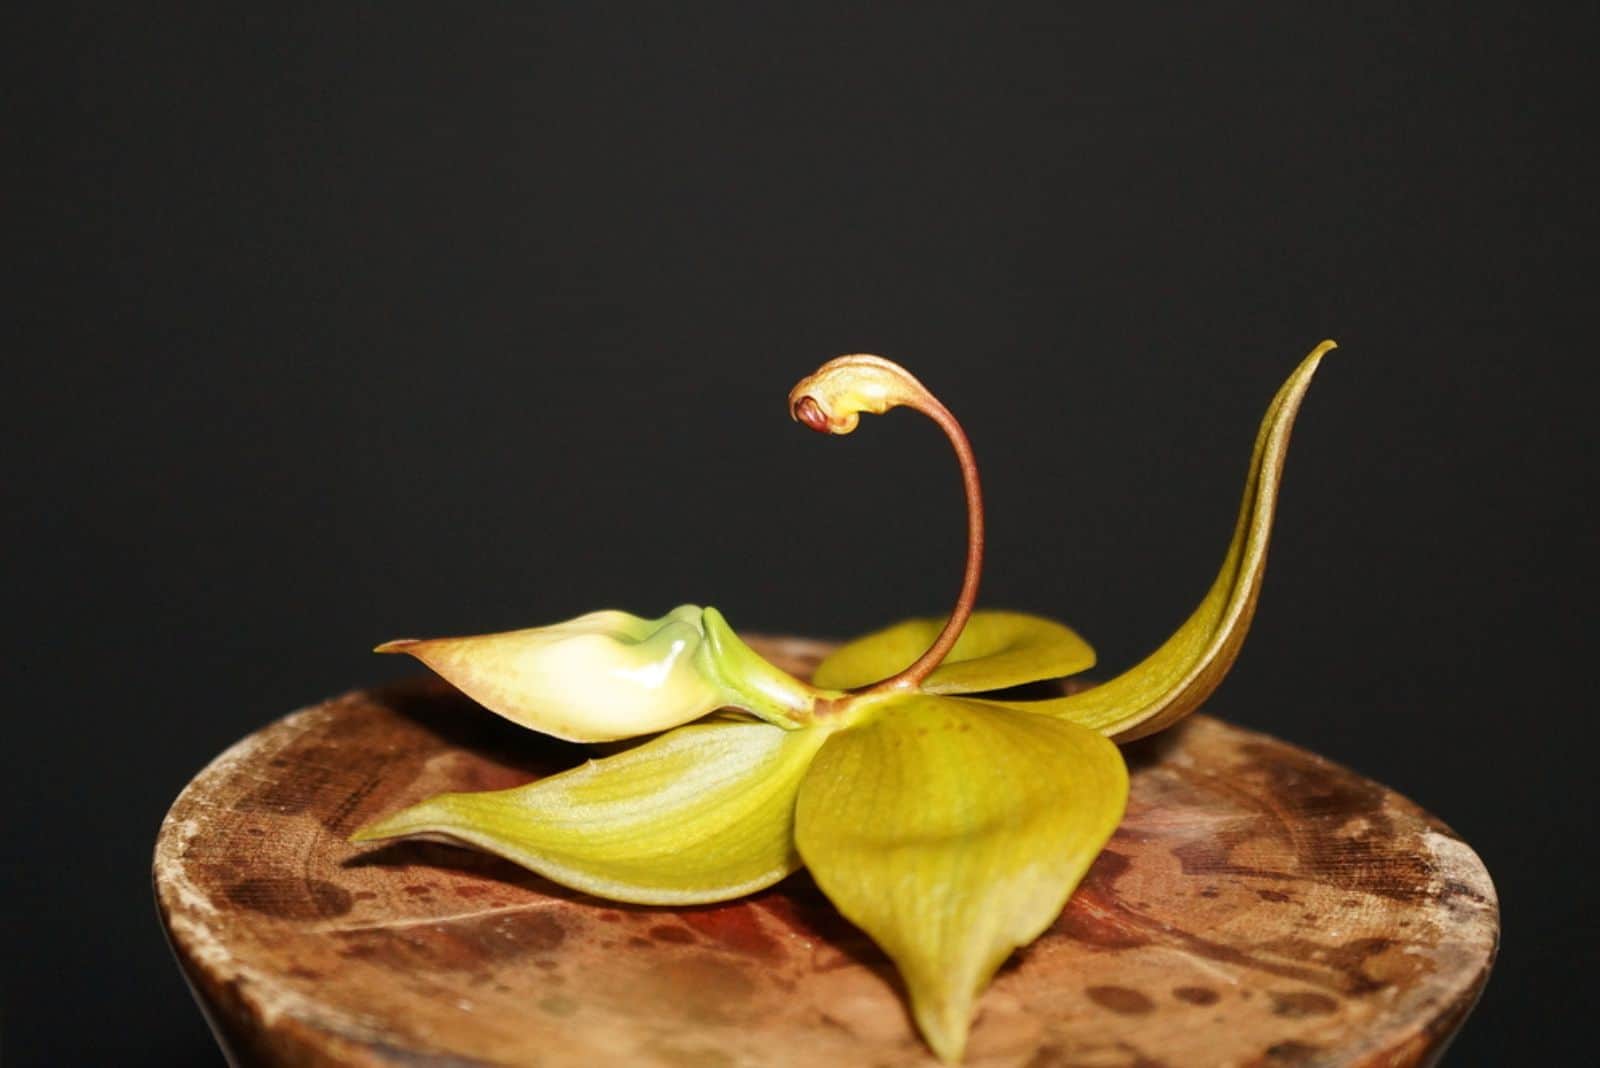 Swan Orchid on wooden table